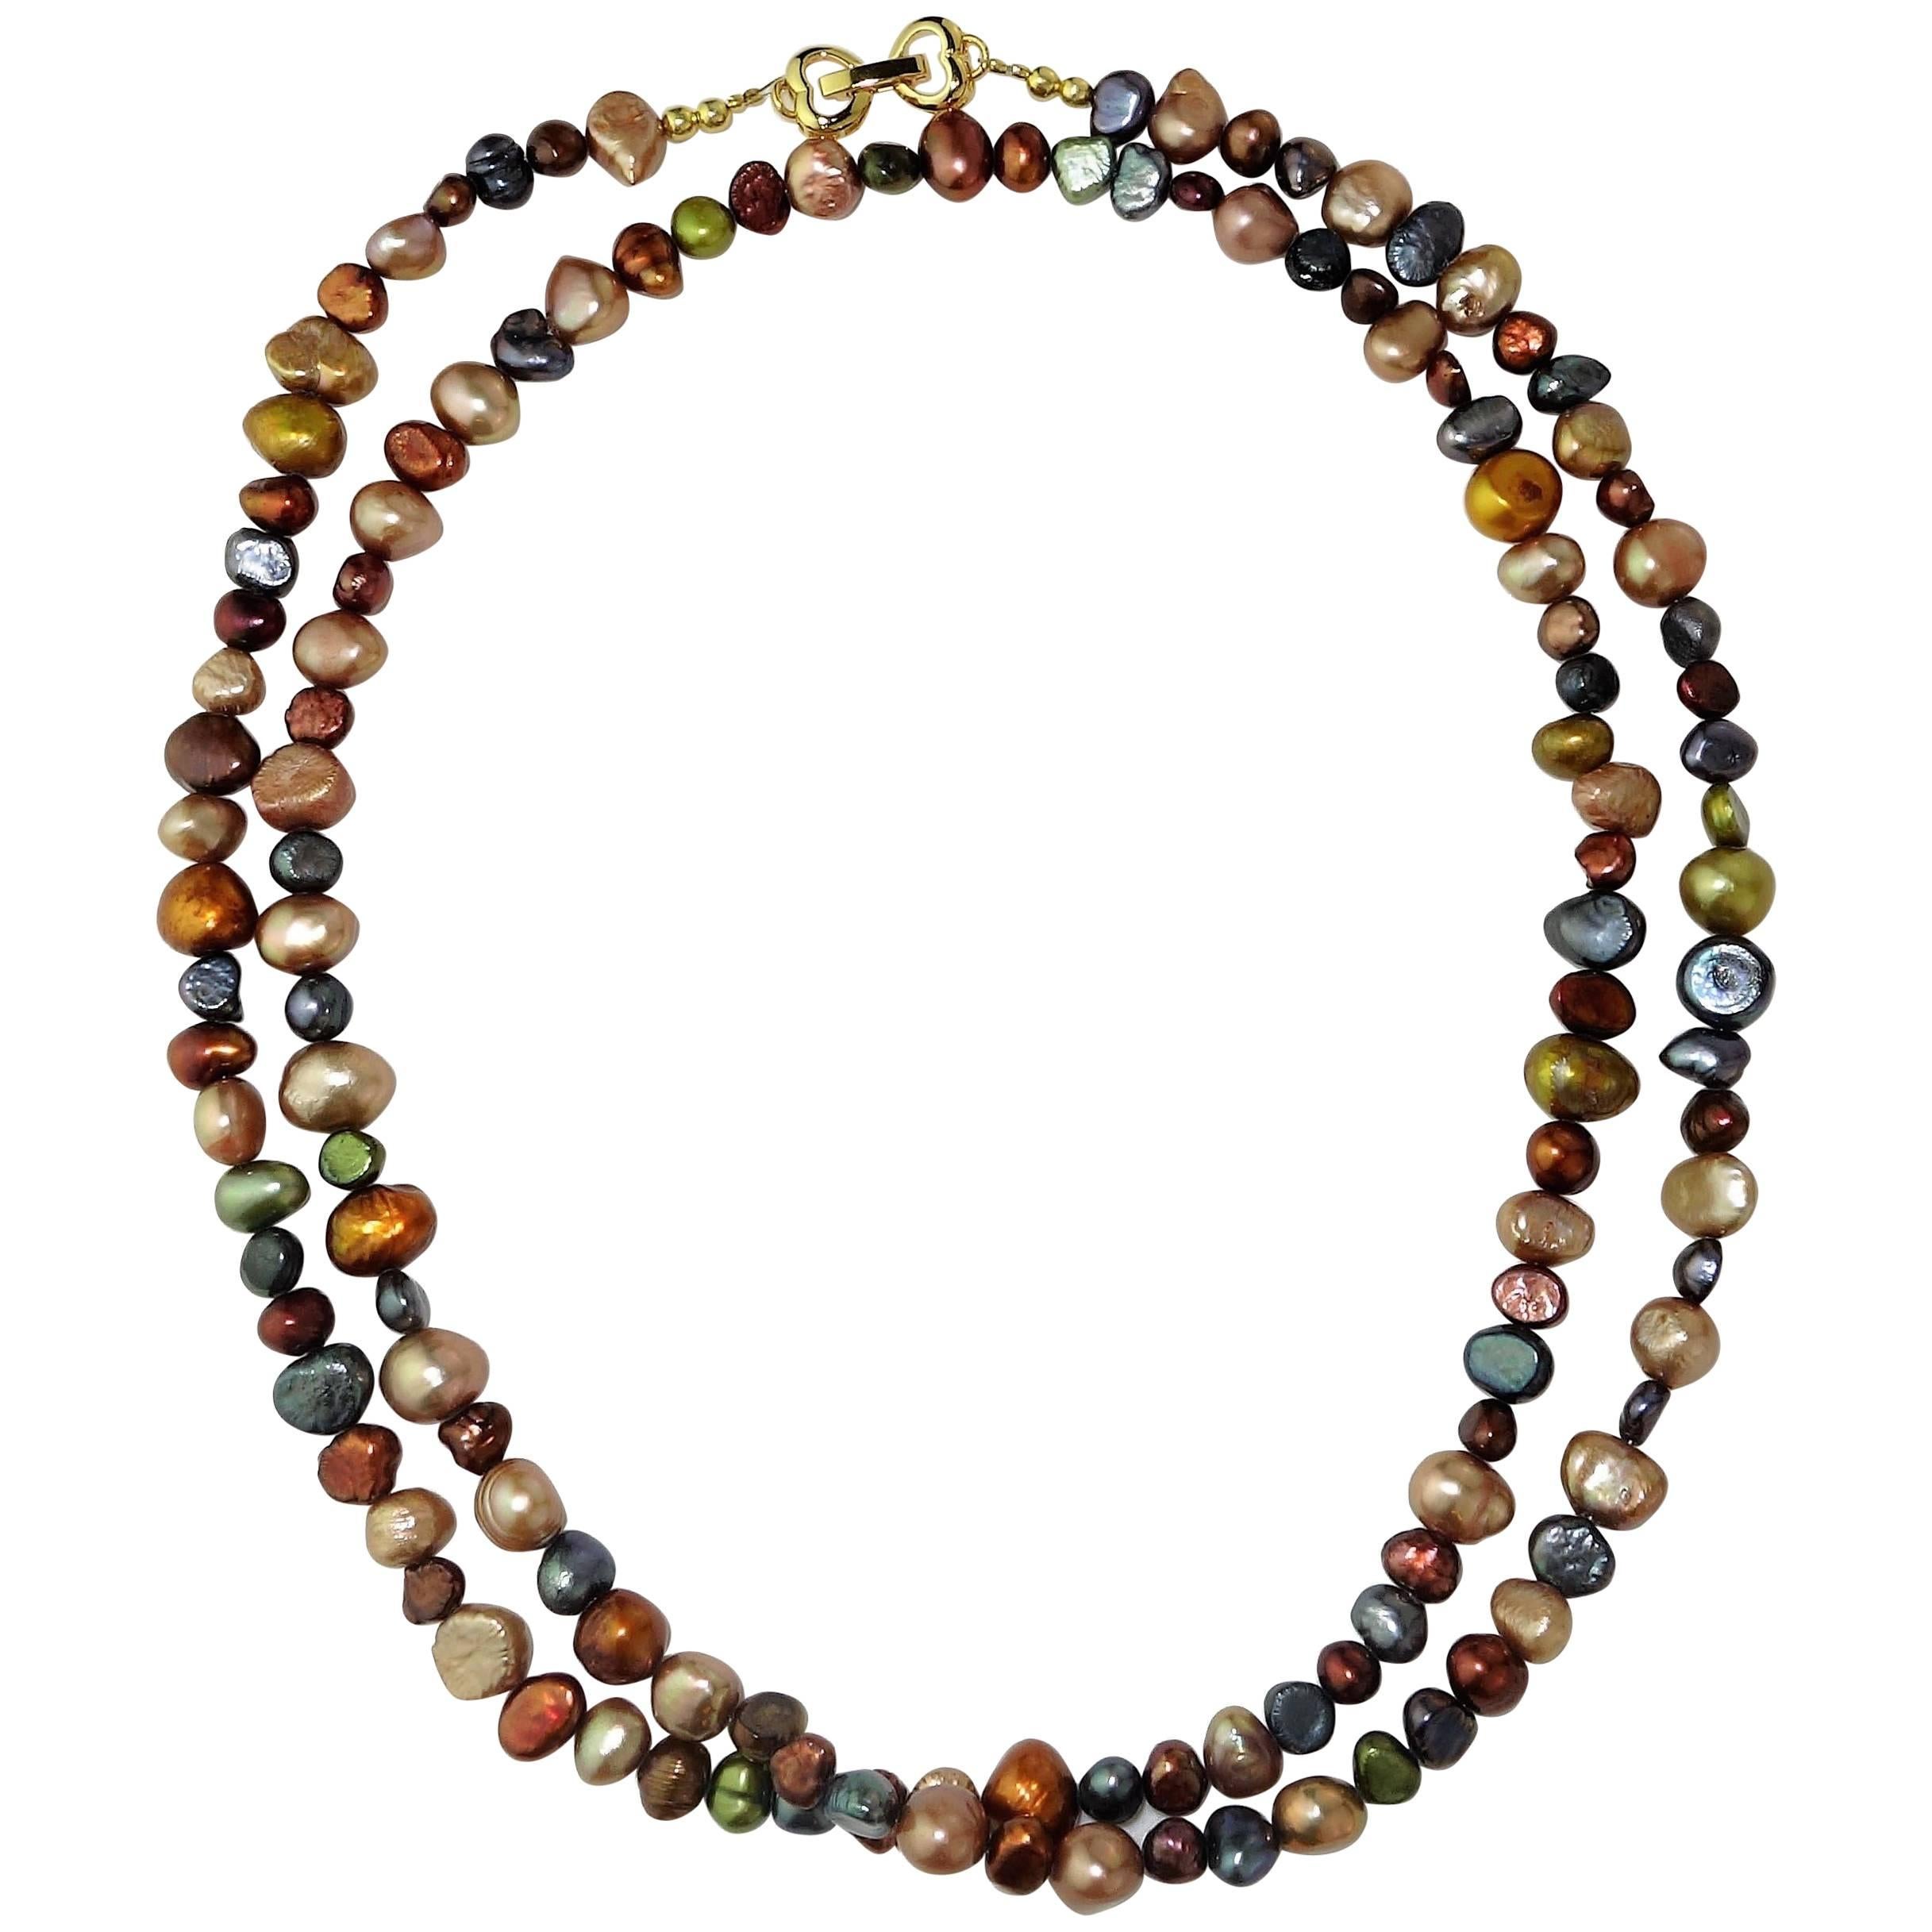 Deep Multi Color Jewel Tone Freshwater Pearl Necklace